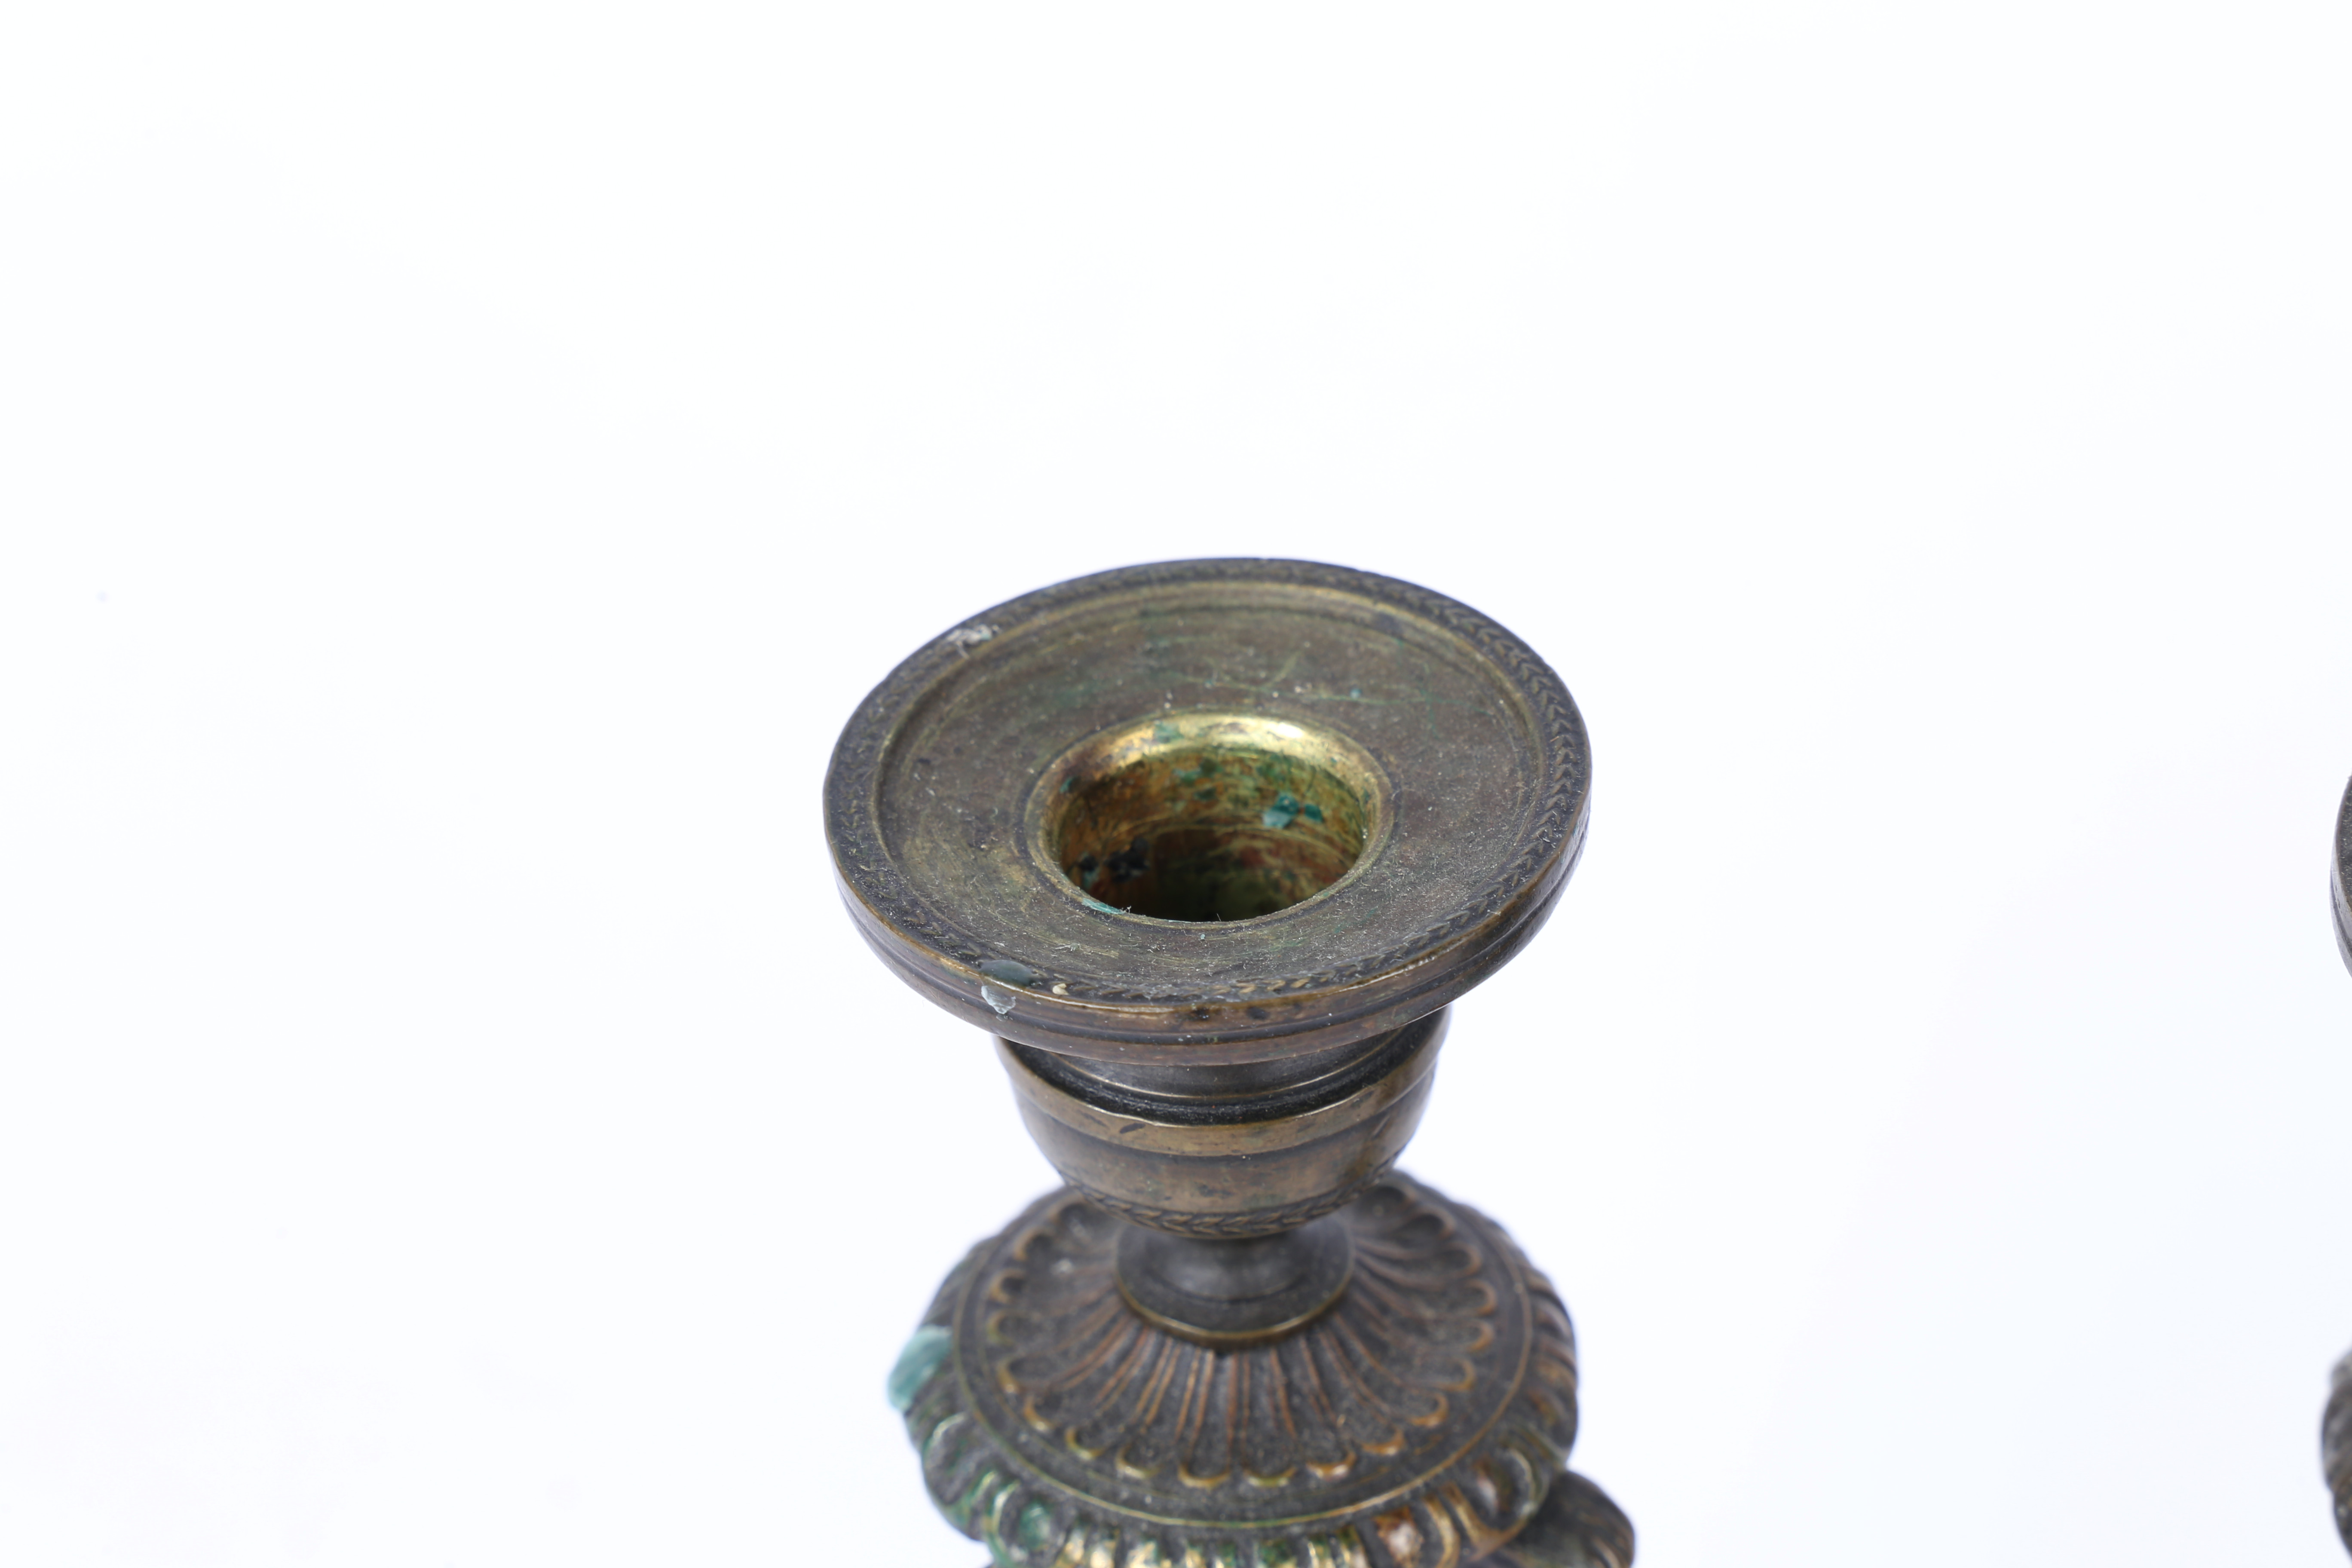 IN THE MANNER OF CHENEY OF LONDON A PAIR OF REGENCY BRONZE CANDLESTICKS. - Image 5 of 6